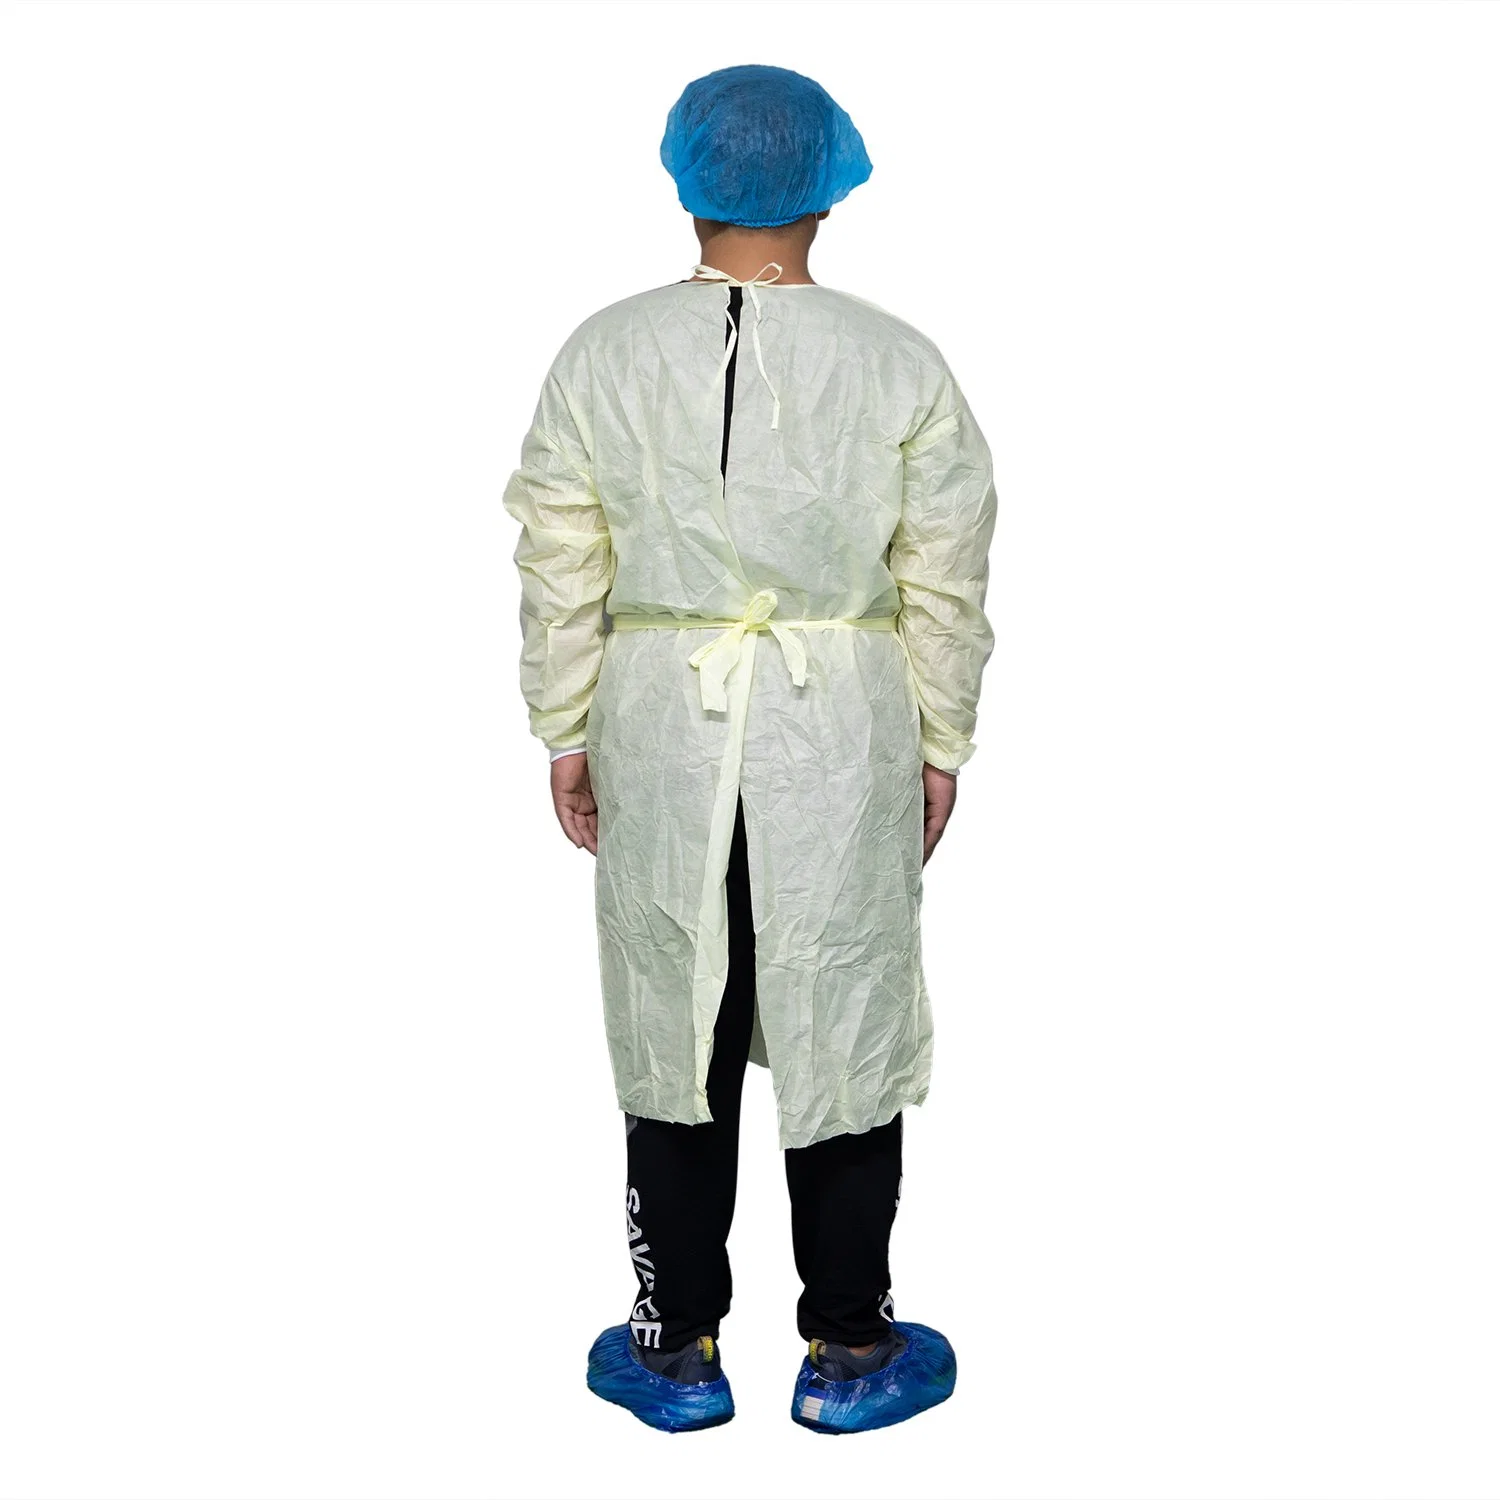 Disposable SMS Medical Isolation Gown with Knitted Cuffs for Hospital